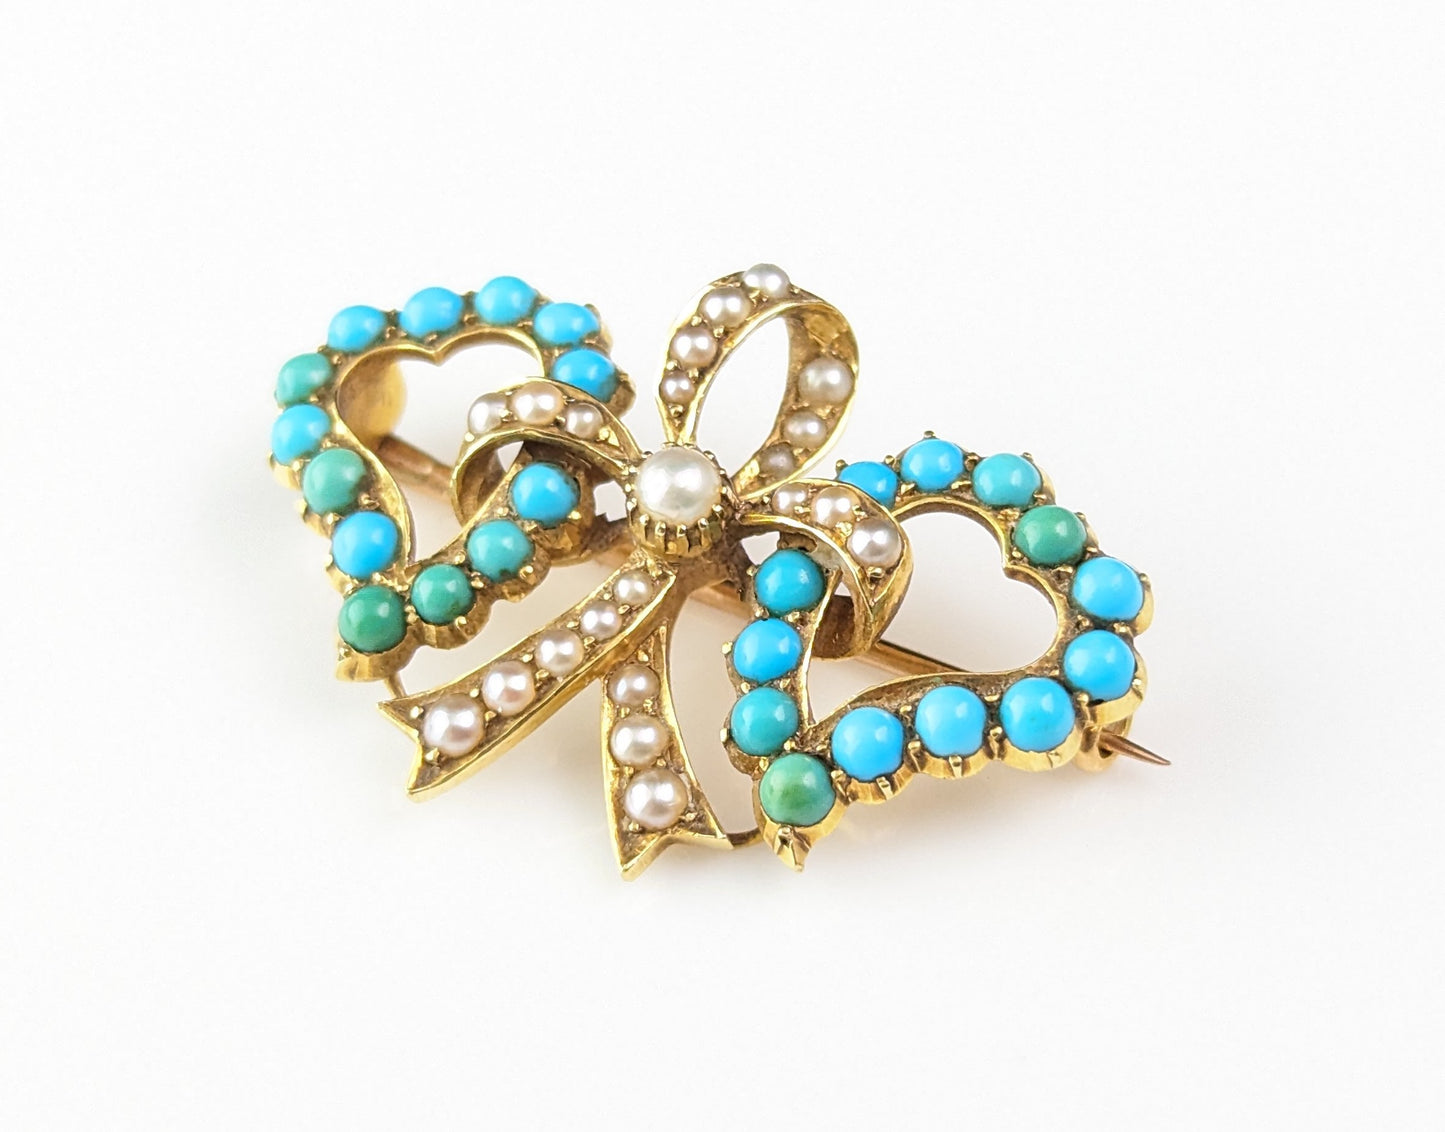 Antique Double witches heart brooch, 22ct gold, Turquoise and pearl, Victorian